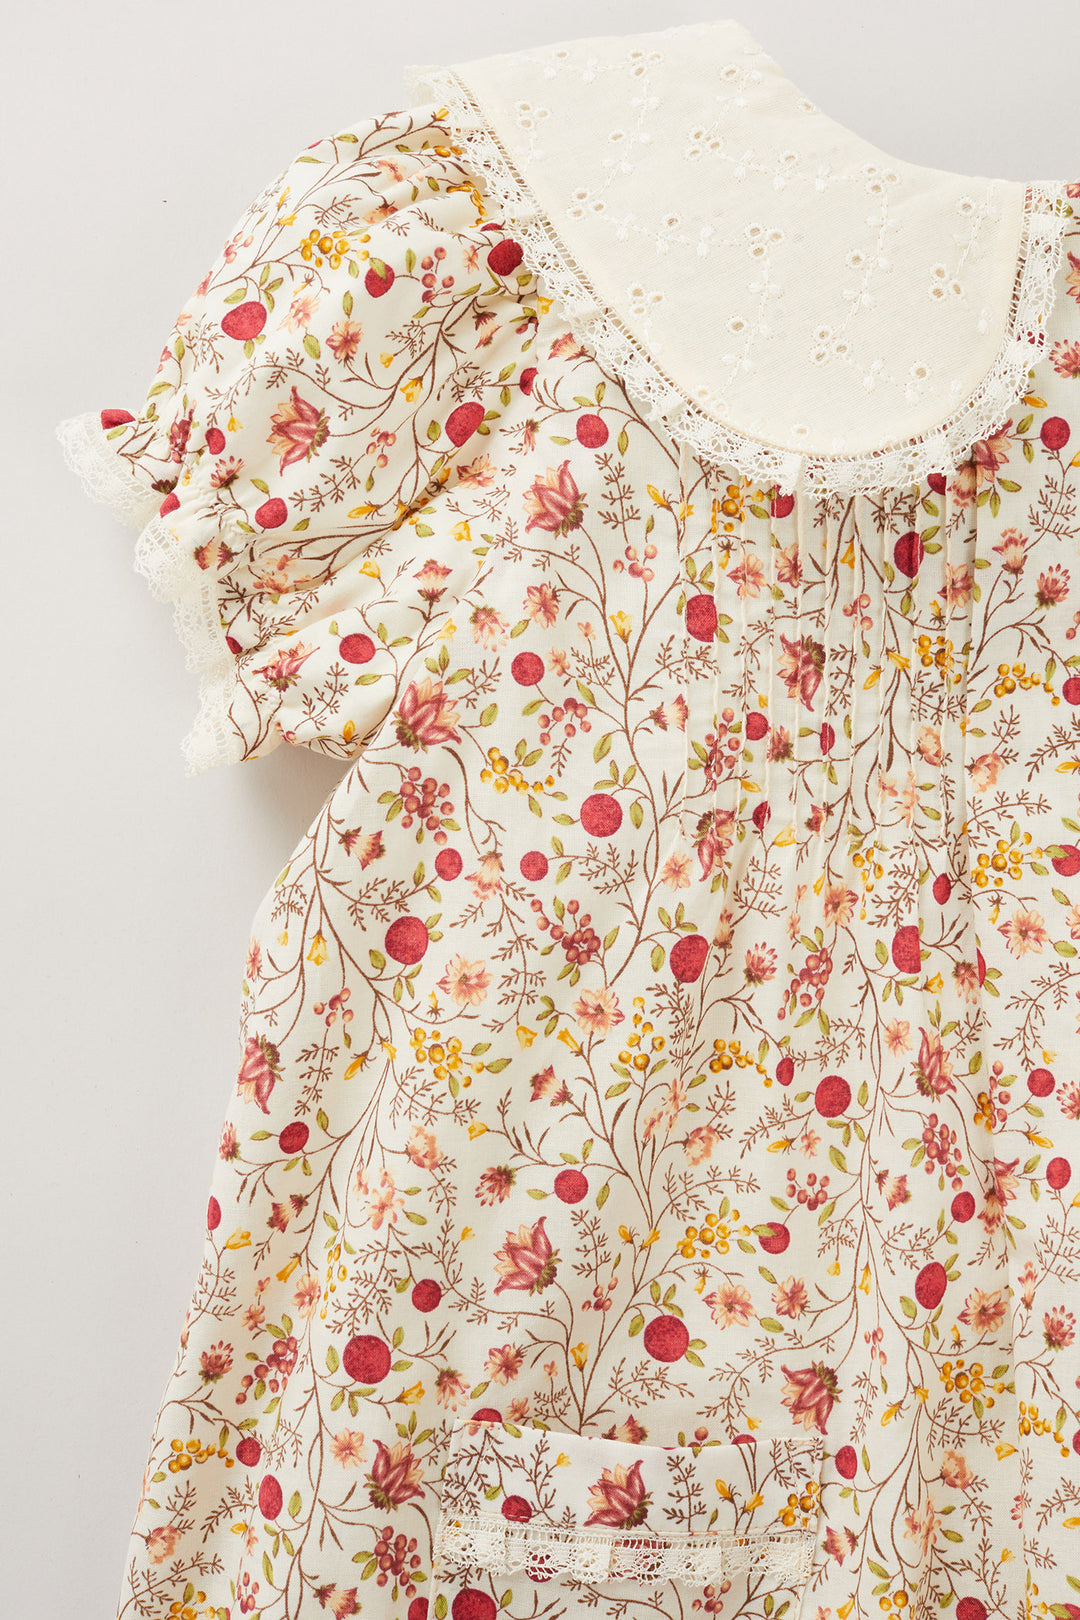 Baby Bubble Dress in Spring Berries